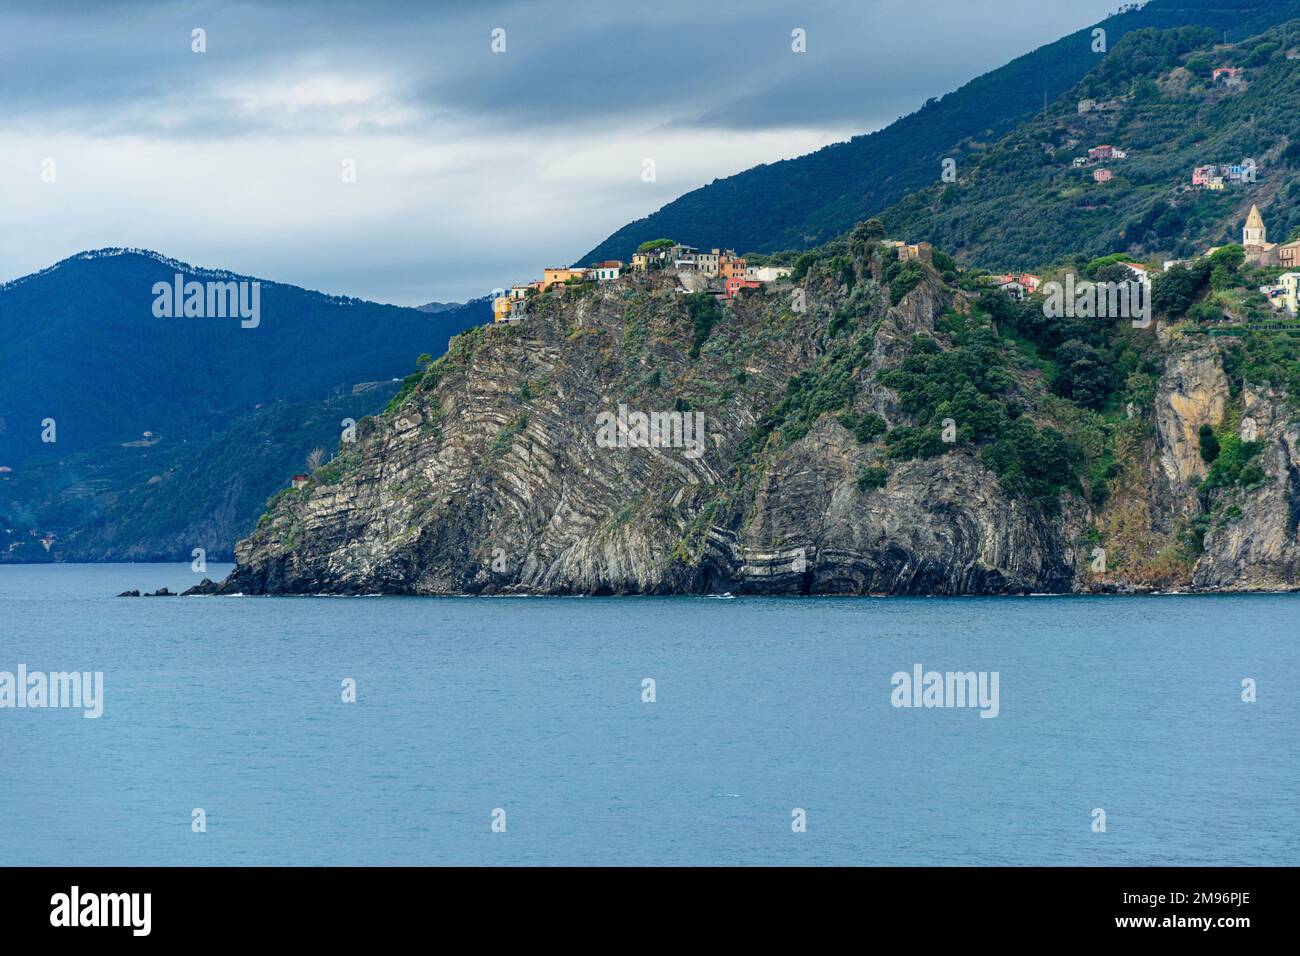 A view across to Corniglio, a cliff-top village on the Cinque Terra, Italy. Folds of strata are clearly seen in the cliffs beneath. Stock Photo